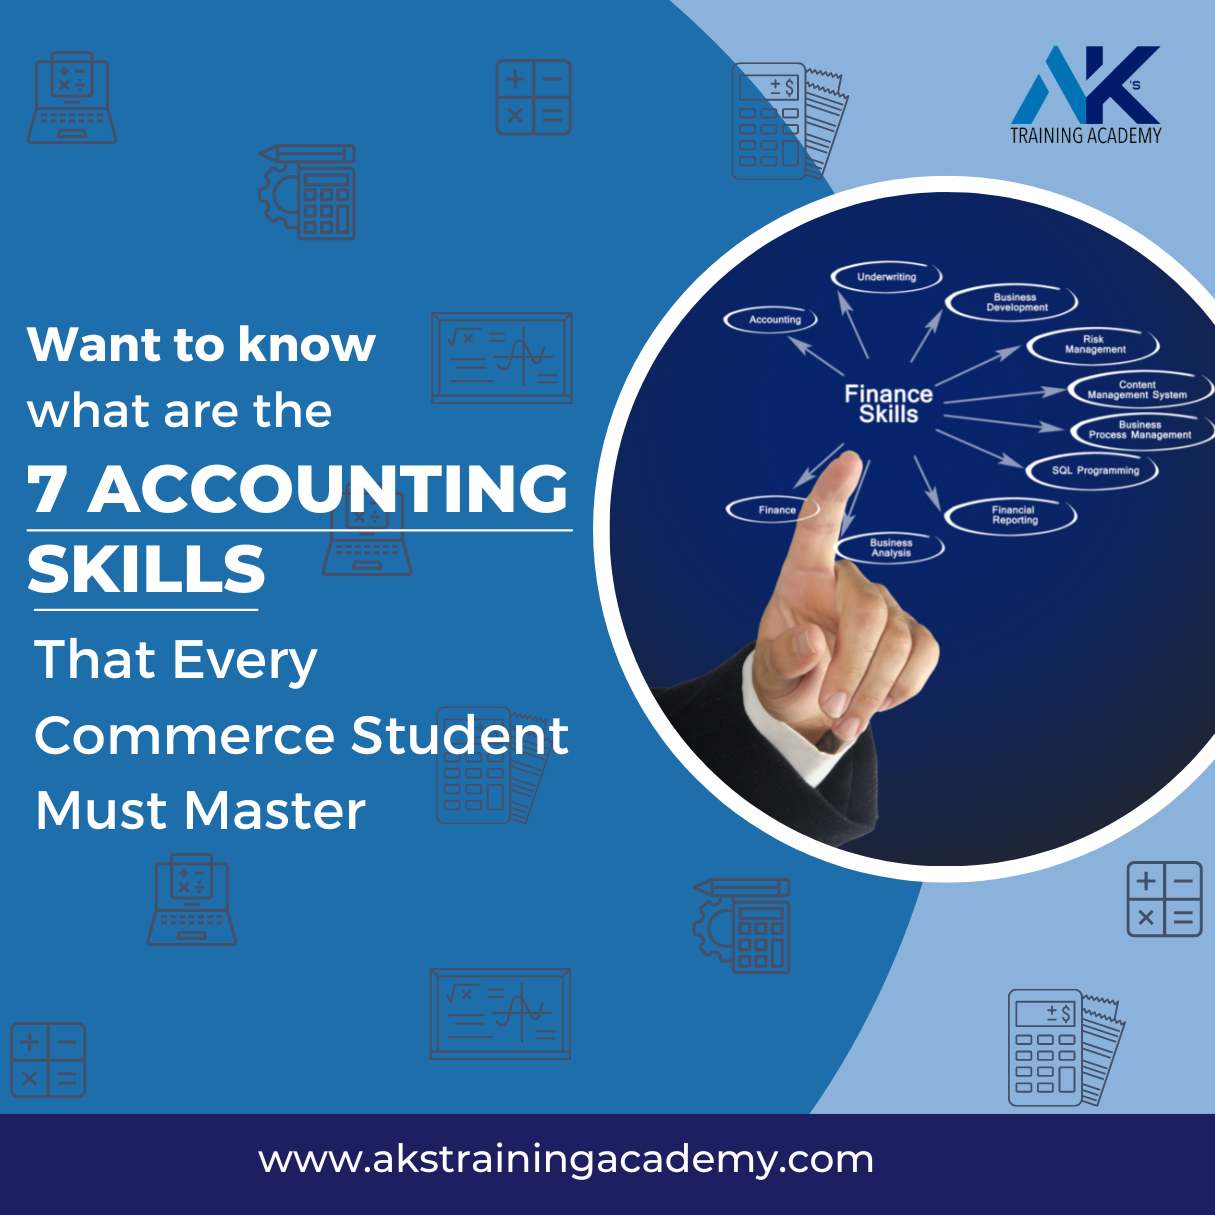 Top 7 Accounting Skills that every commerce student must learn